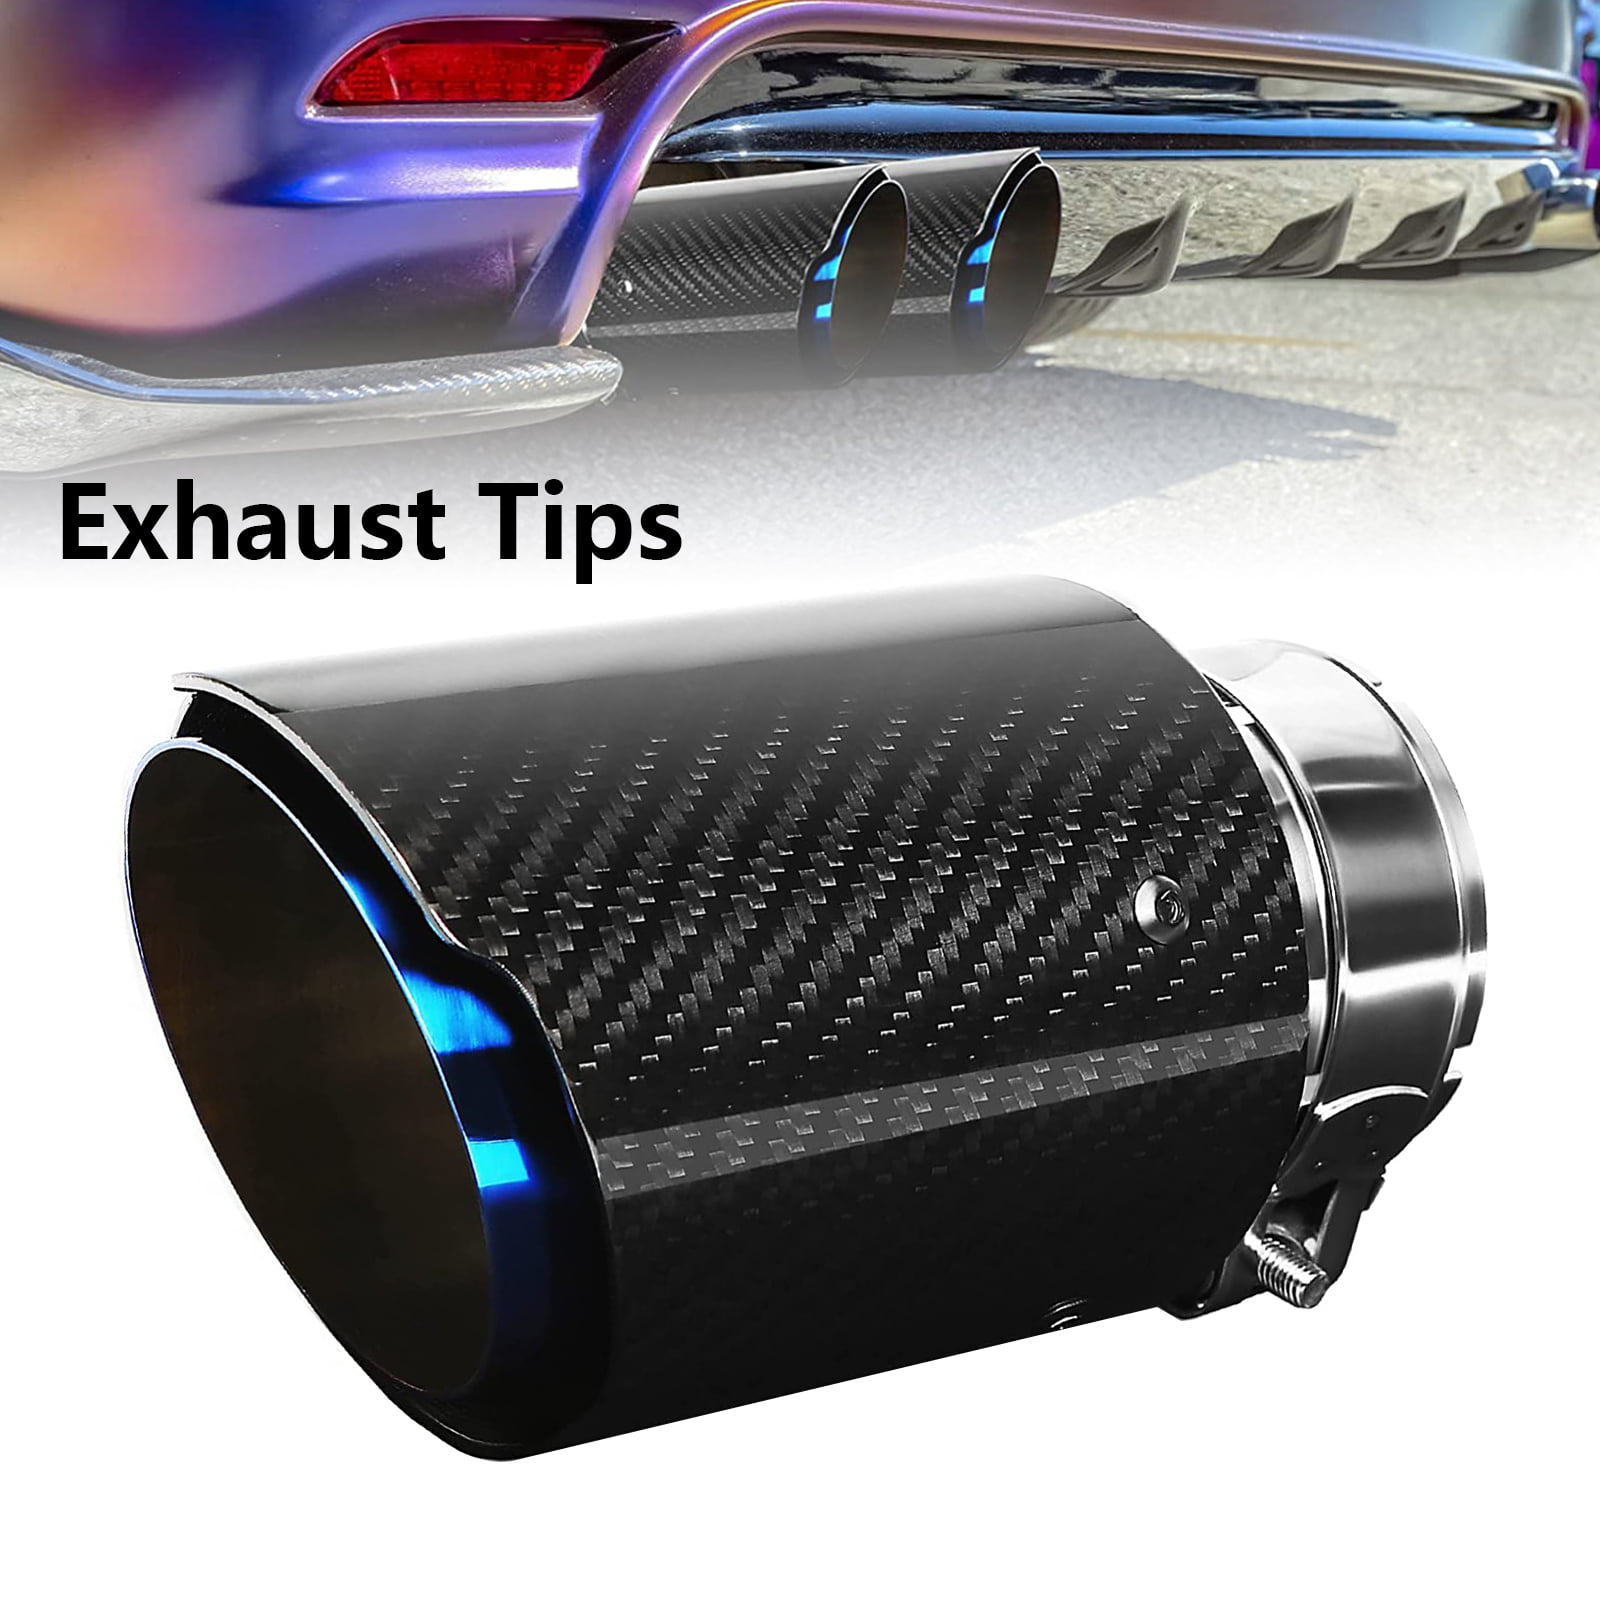 Exhaust Tips Muffler Stainless Steel and Glossy Carbon Fiber Car Exhaust Tail End Pipe Shiny Black Silver 2.5 Outlet 89mm Inlet 63mm 